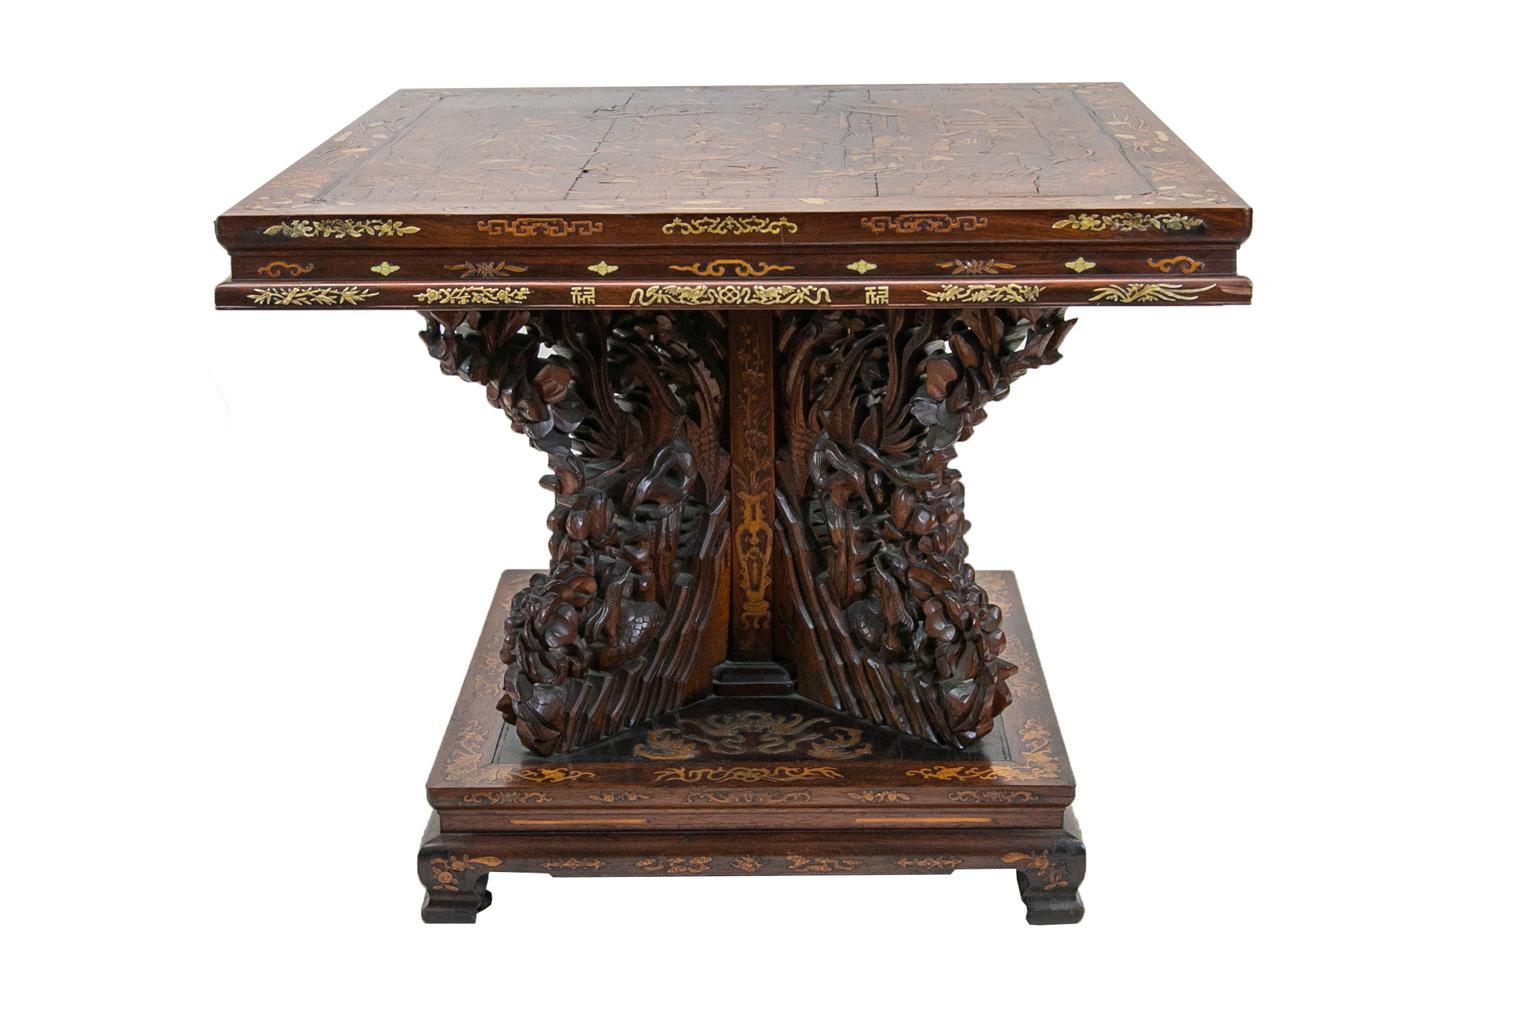 Chinese inlaid center table, is composed of rosewood and walnut. It is profusely inlaid with pagodas, human figures, birds, deer, water buffalo, and tree arabesques. It is inlaid with satinwood and bone. The legs on the base are in a cross